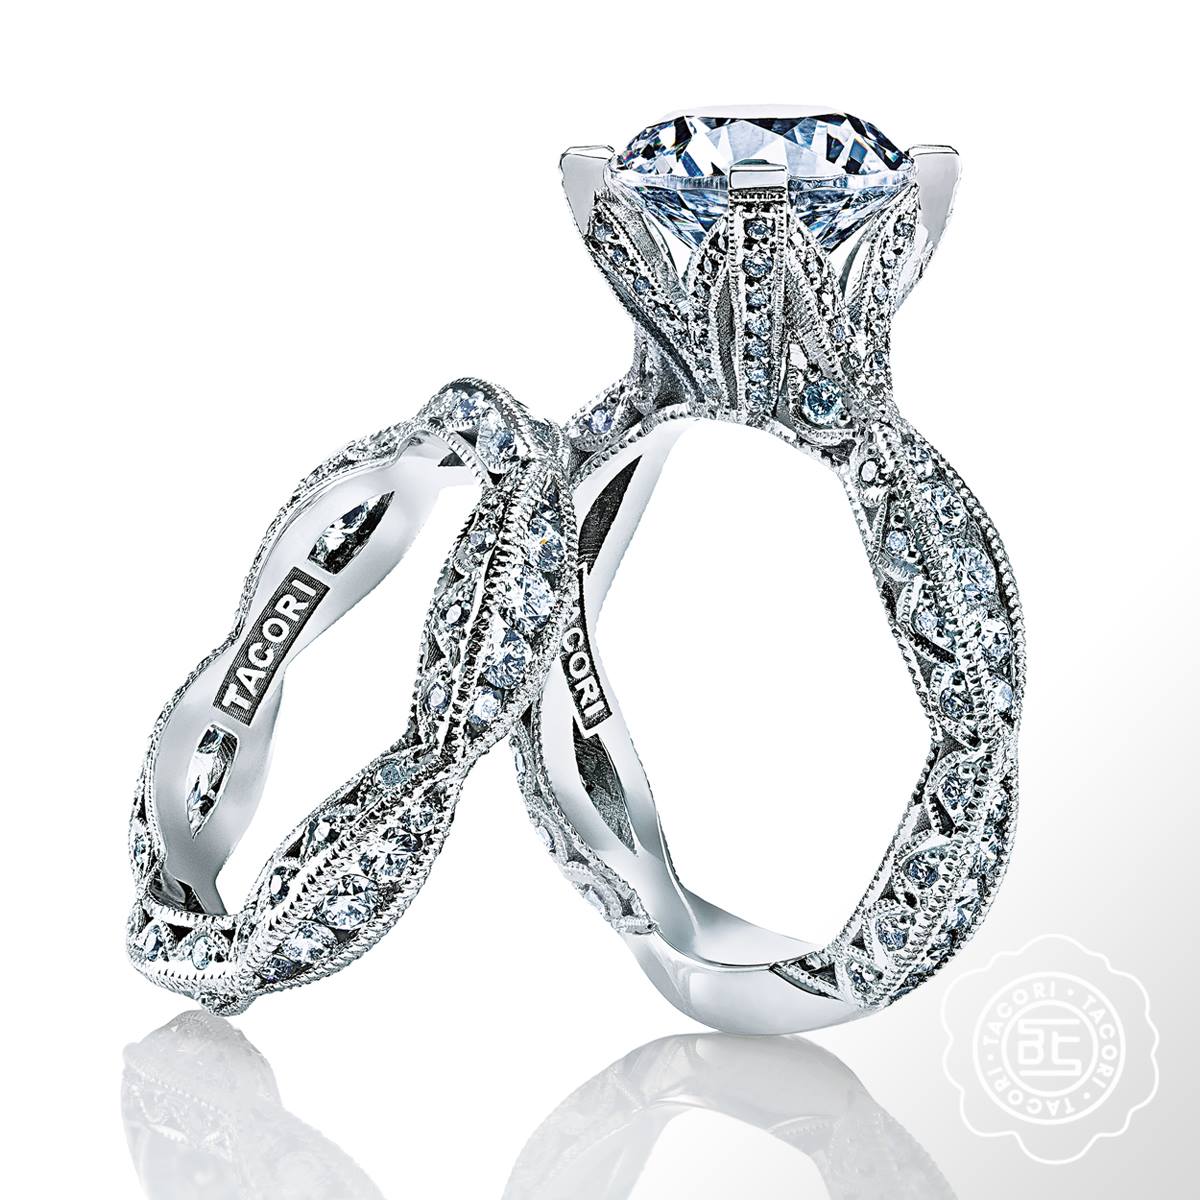 What to Keep in Head While Designing Your Own Engagement Ring?